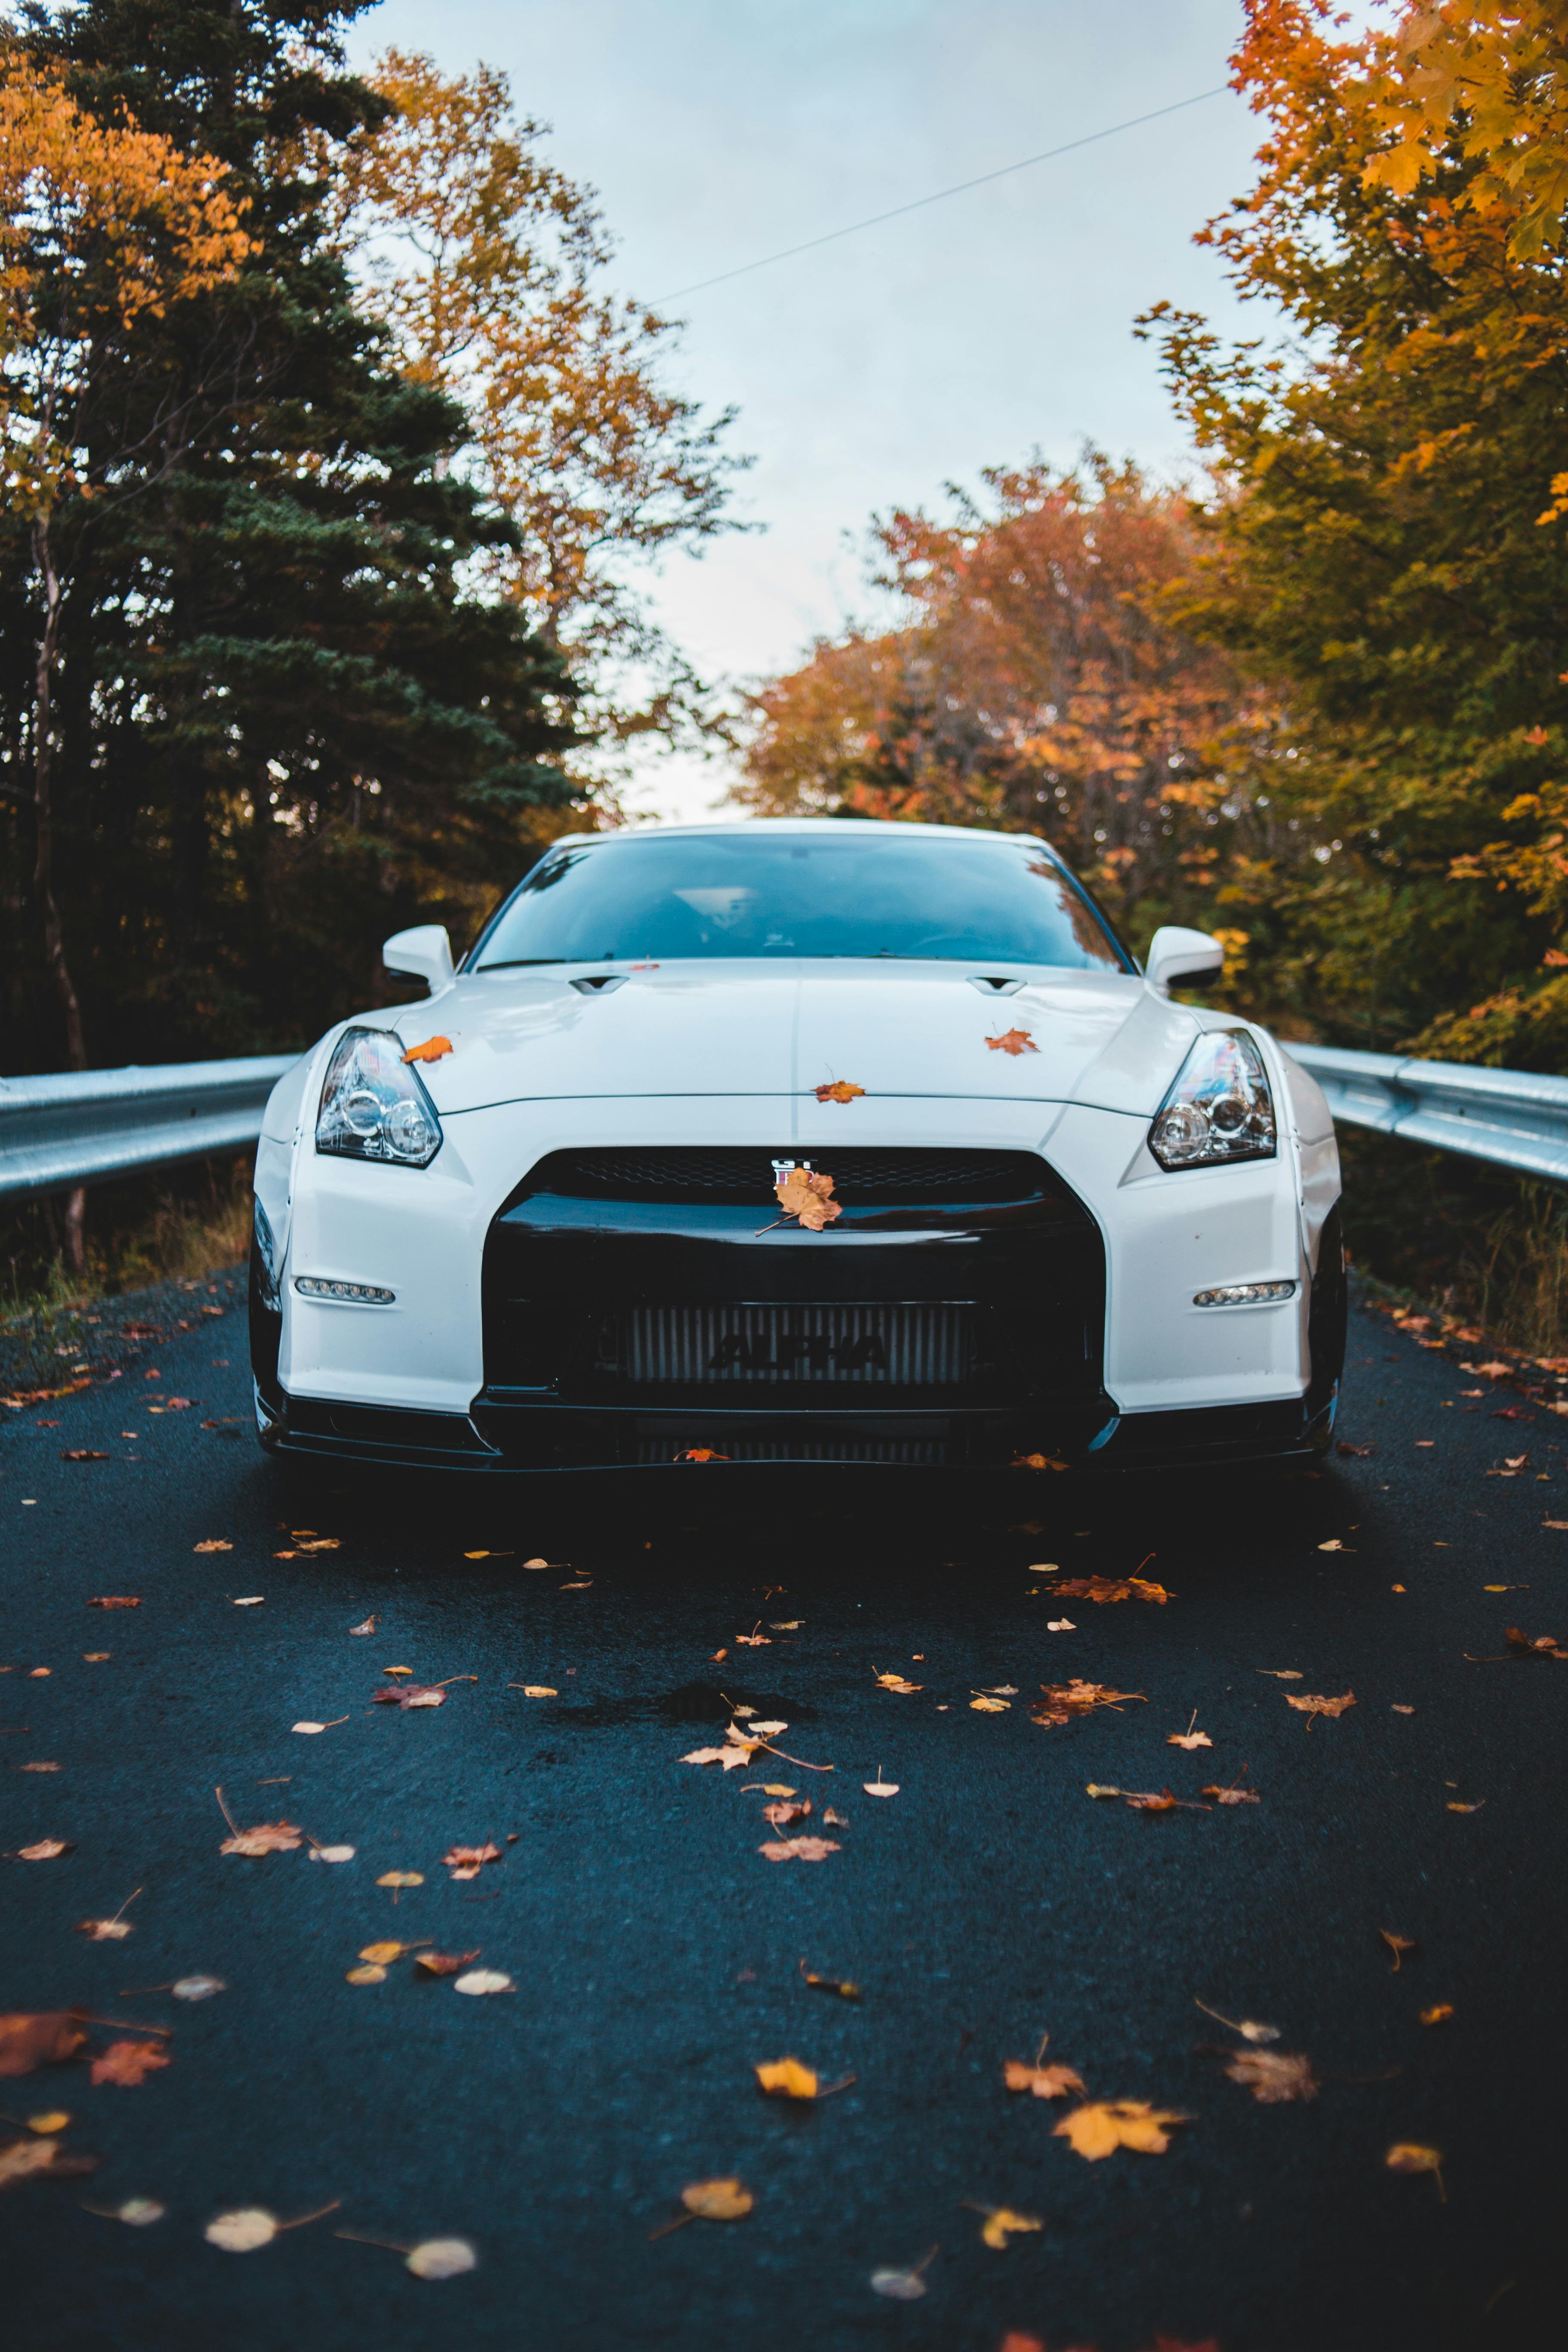 New sport car driving on road in countryside in autumn · Free Stock Photo